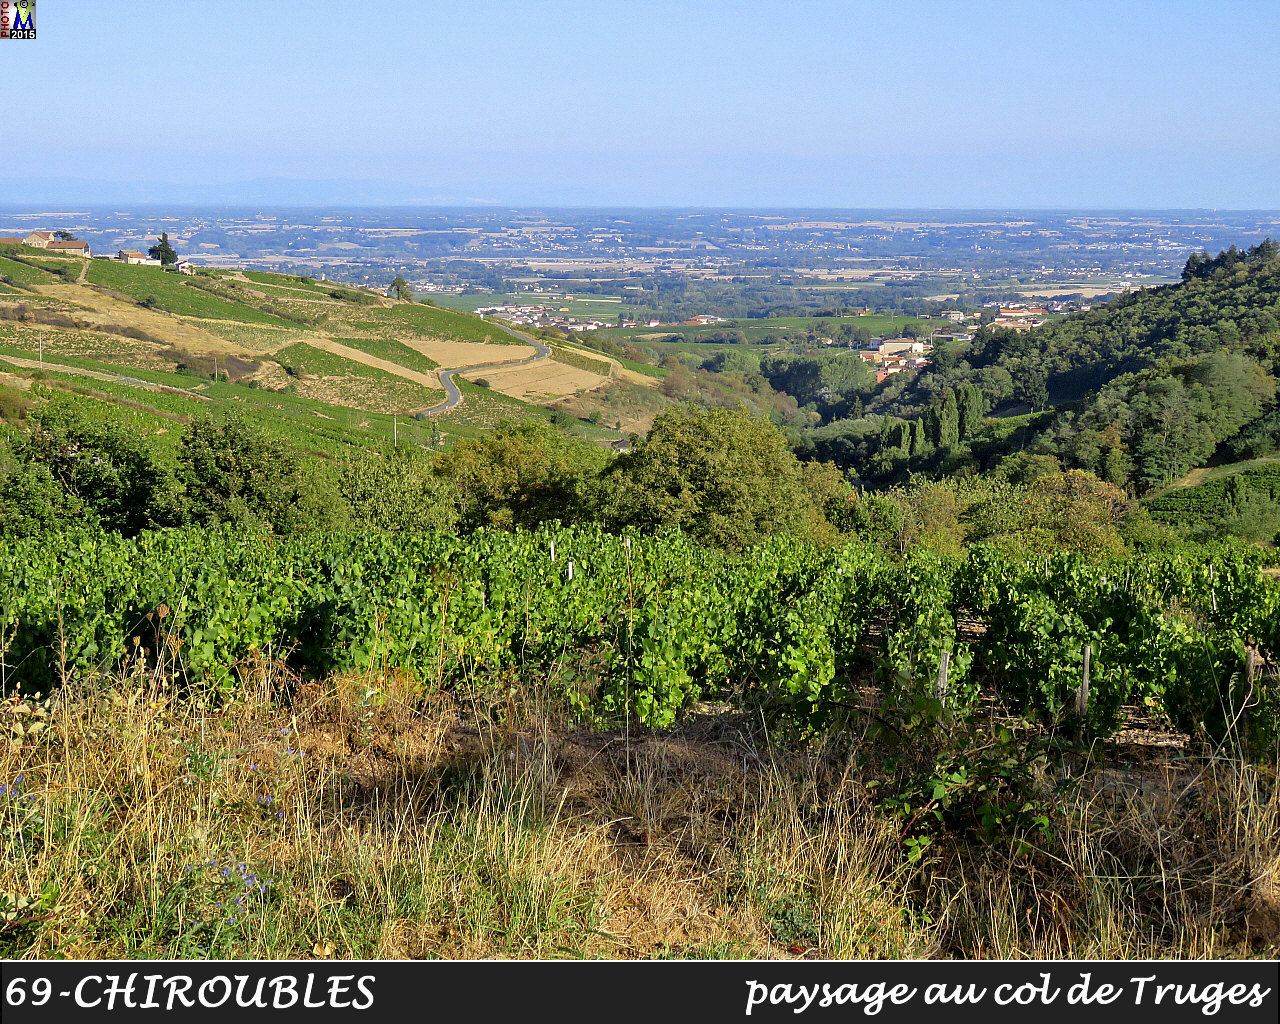 69CHIROUBLES_paysage_110.jpg